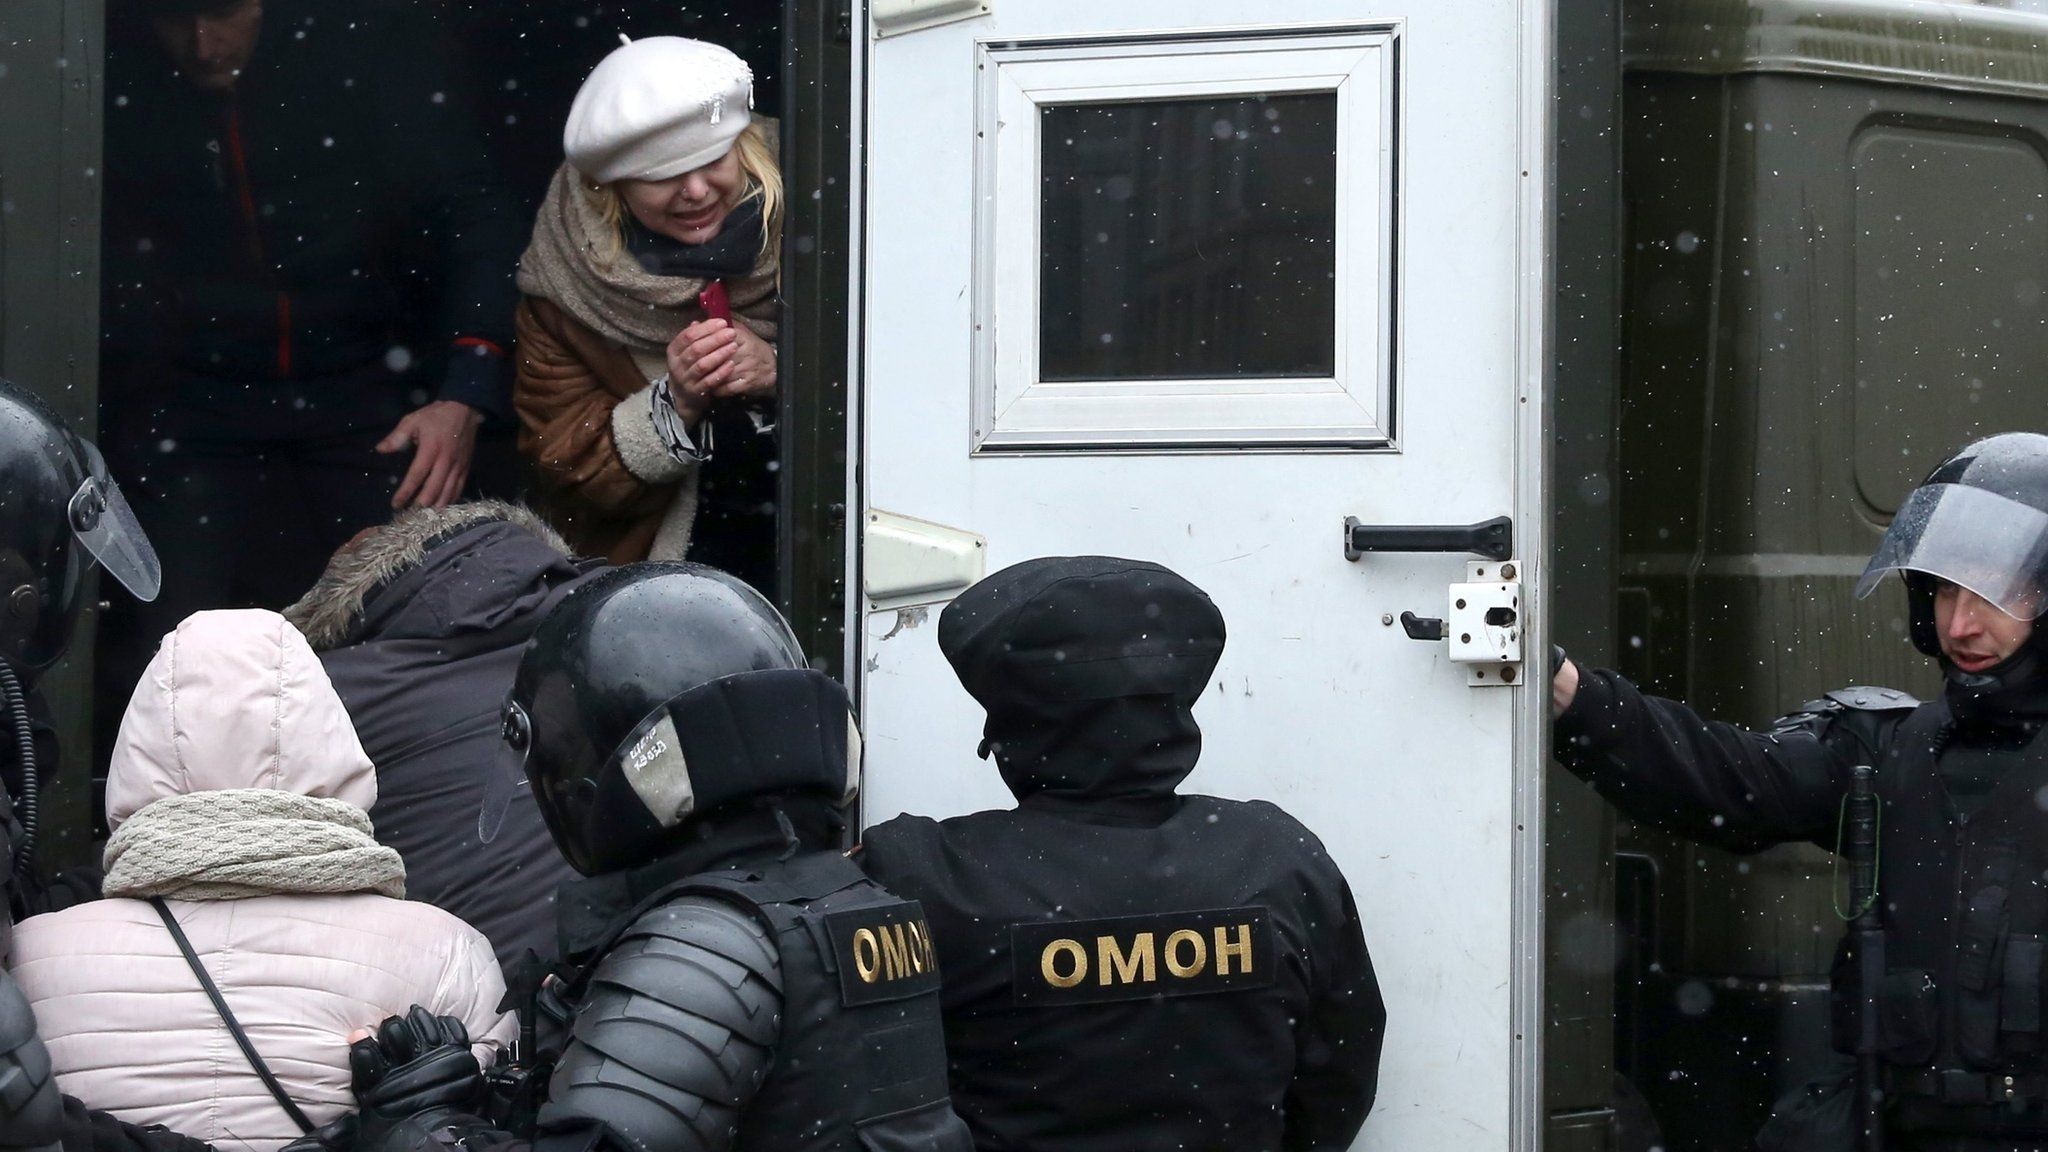 Police officers put protesters in a van during a rally in Minsk, Belarus, 25 March 2017